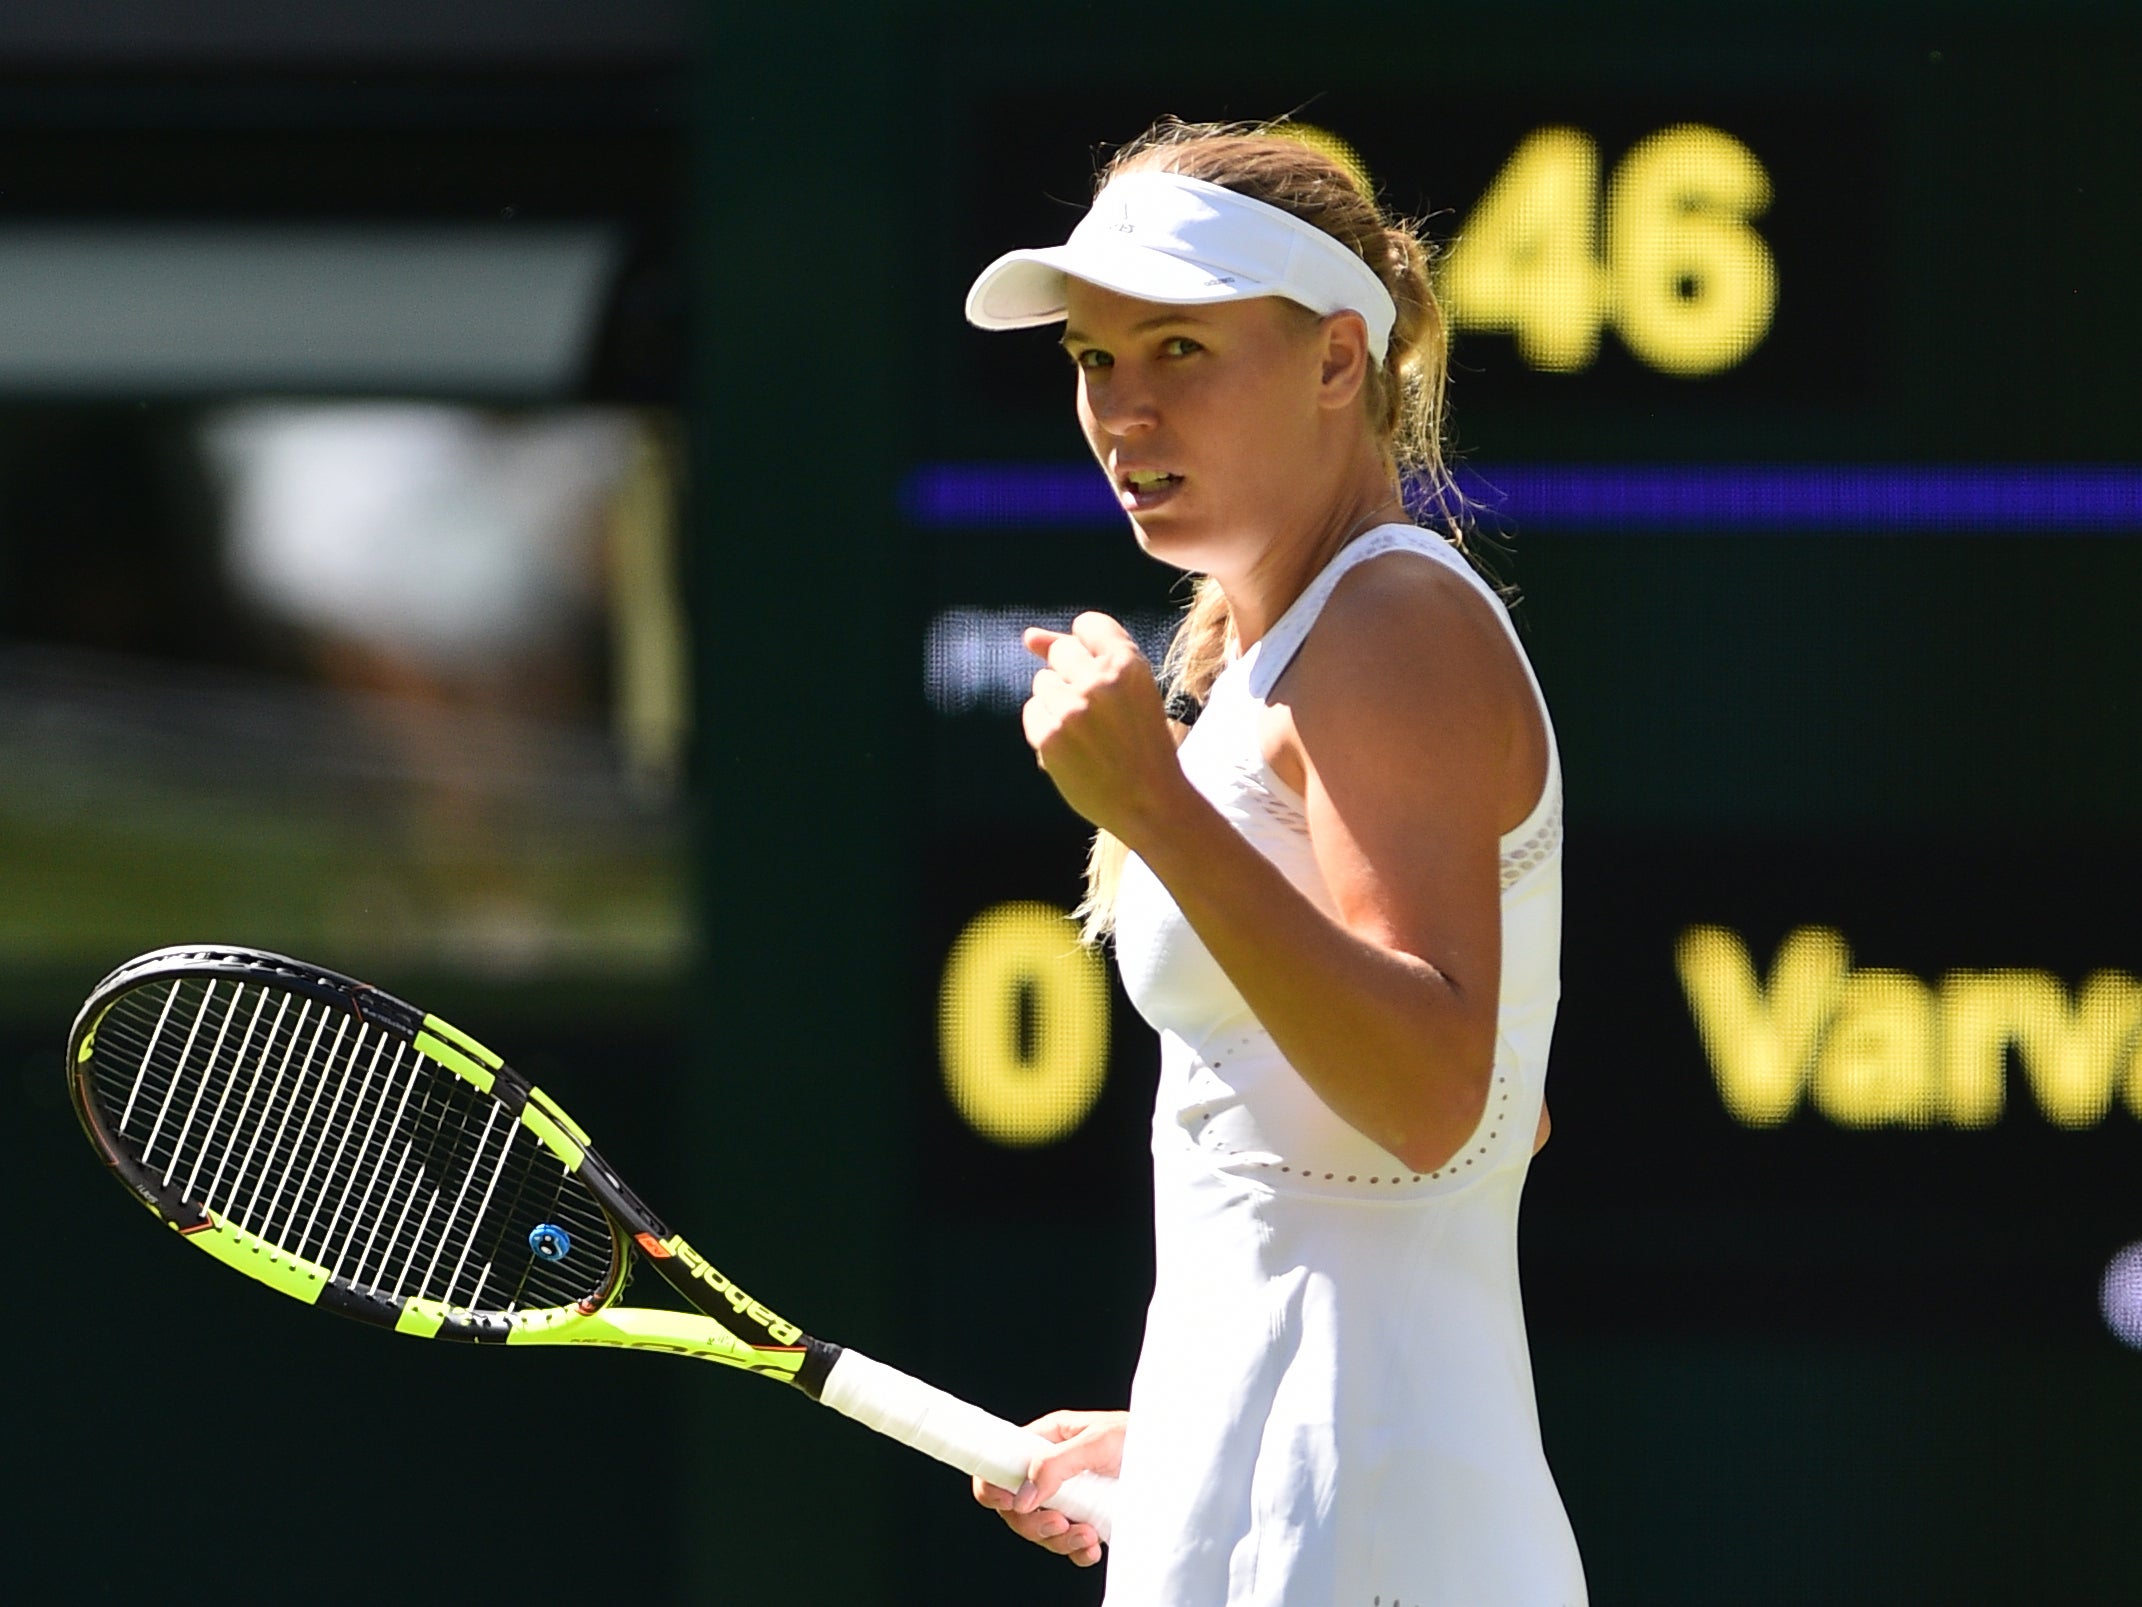 Caroline Wozniacki booked her place in the second round